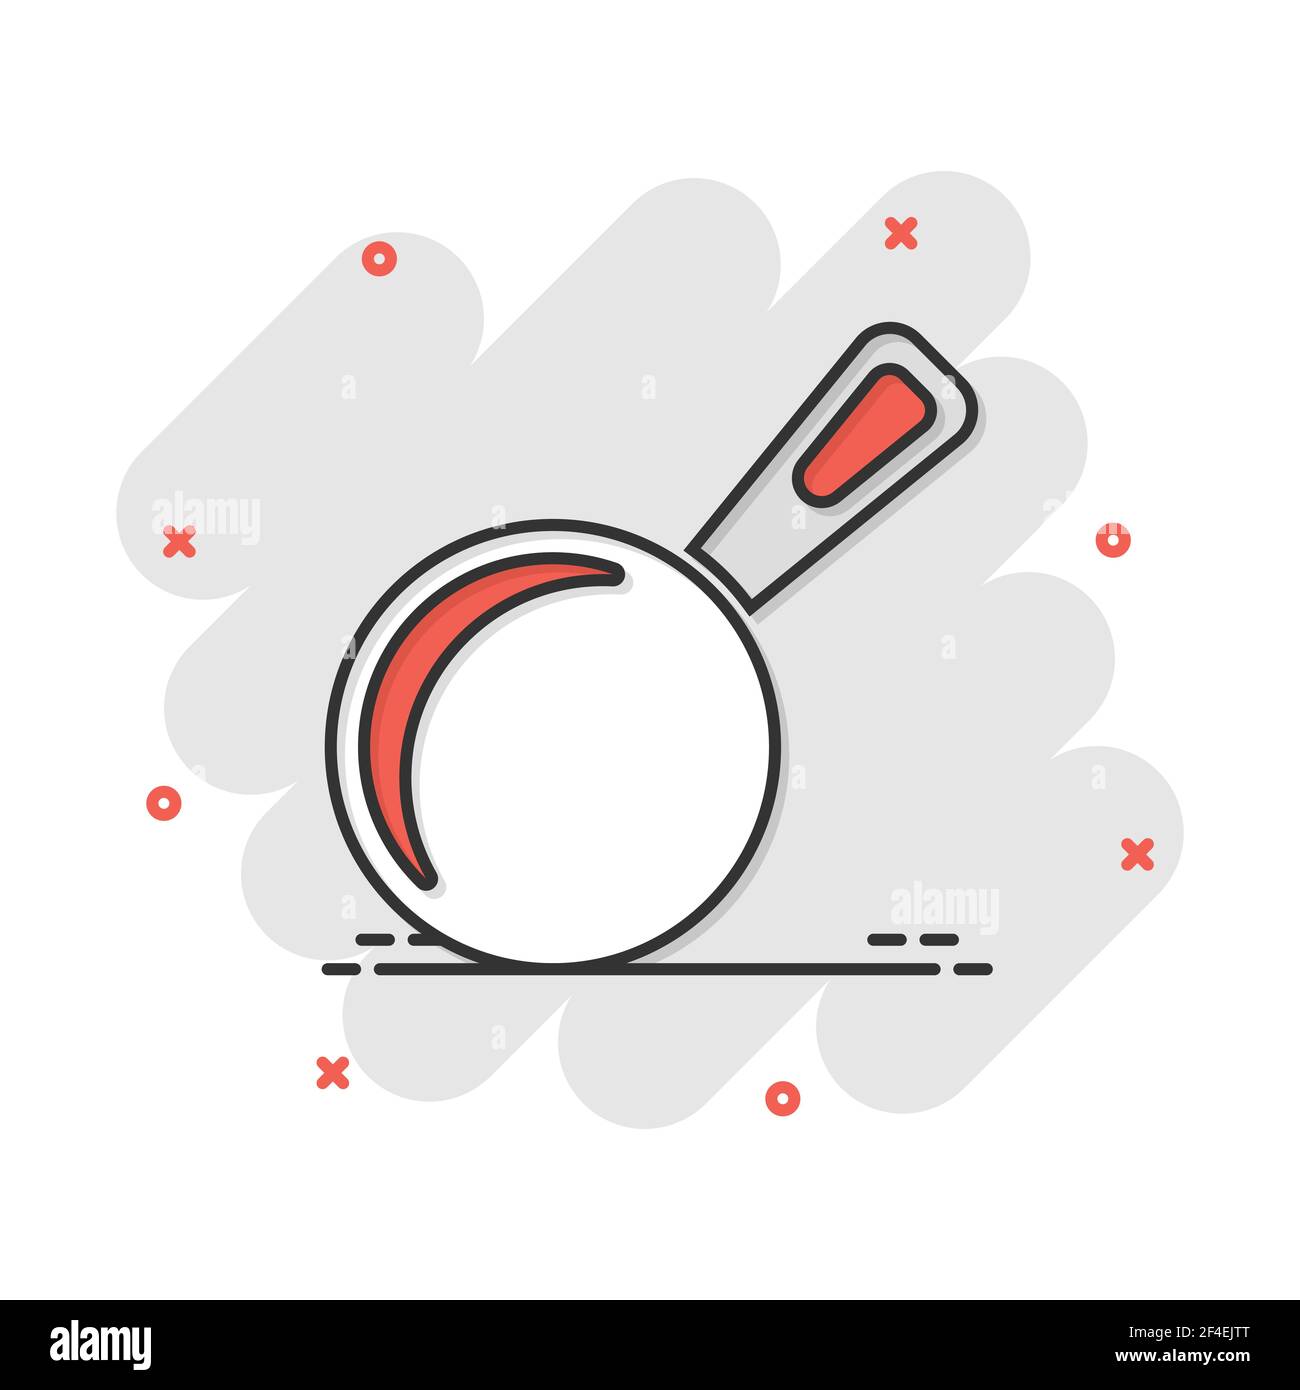 Vector cartoon frying pan icon in comic style. Cooking pan concept illustration pictogram. Skillet kitchen equipment business splash effect concept. Stock Vector